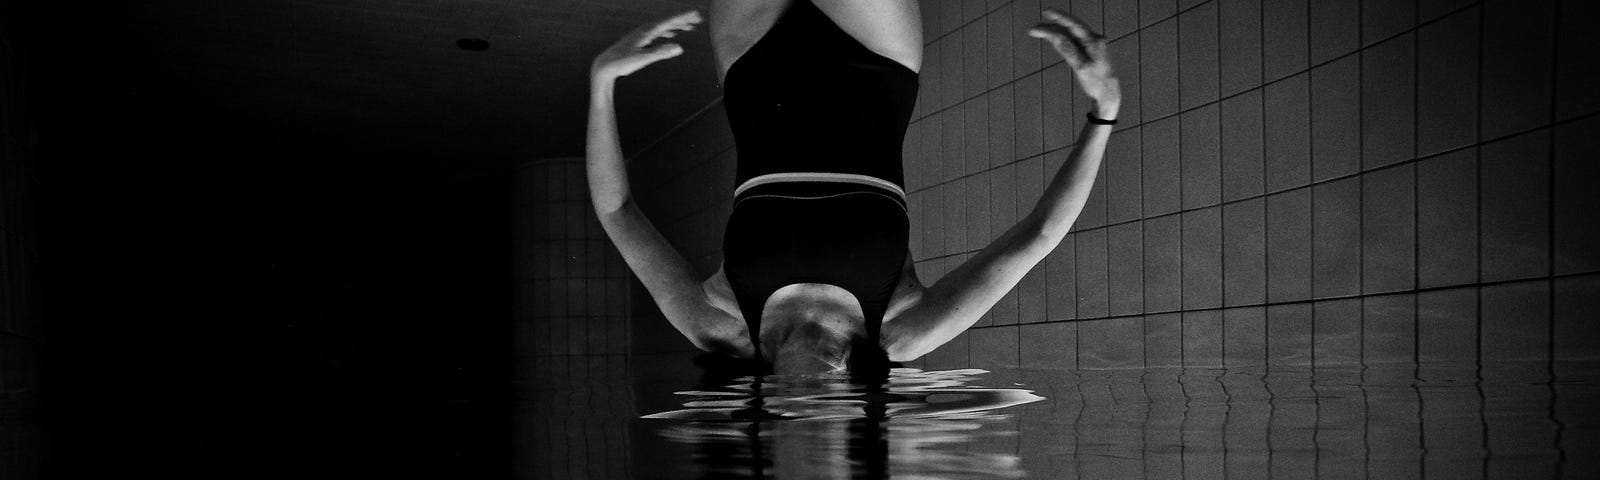 A black and white underwater image of girl in a black one-piece bathing suit in a pool, with the reflection obscuring her head such that her neck and the reflection of her neck meet at the water line. The image is rotated 180 degrees so that the reflection is the bottom, upright version of the girl.